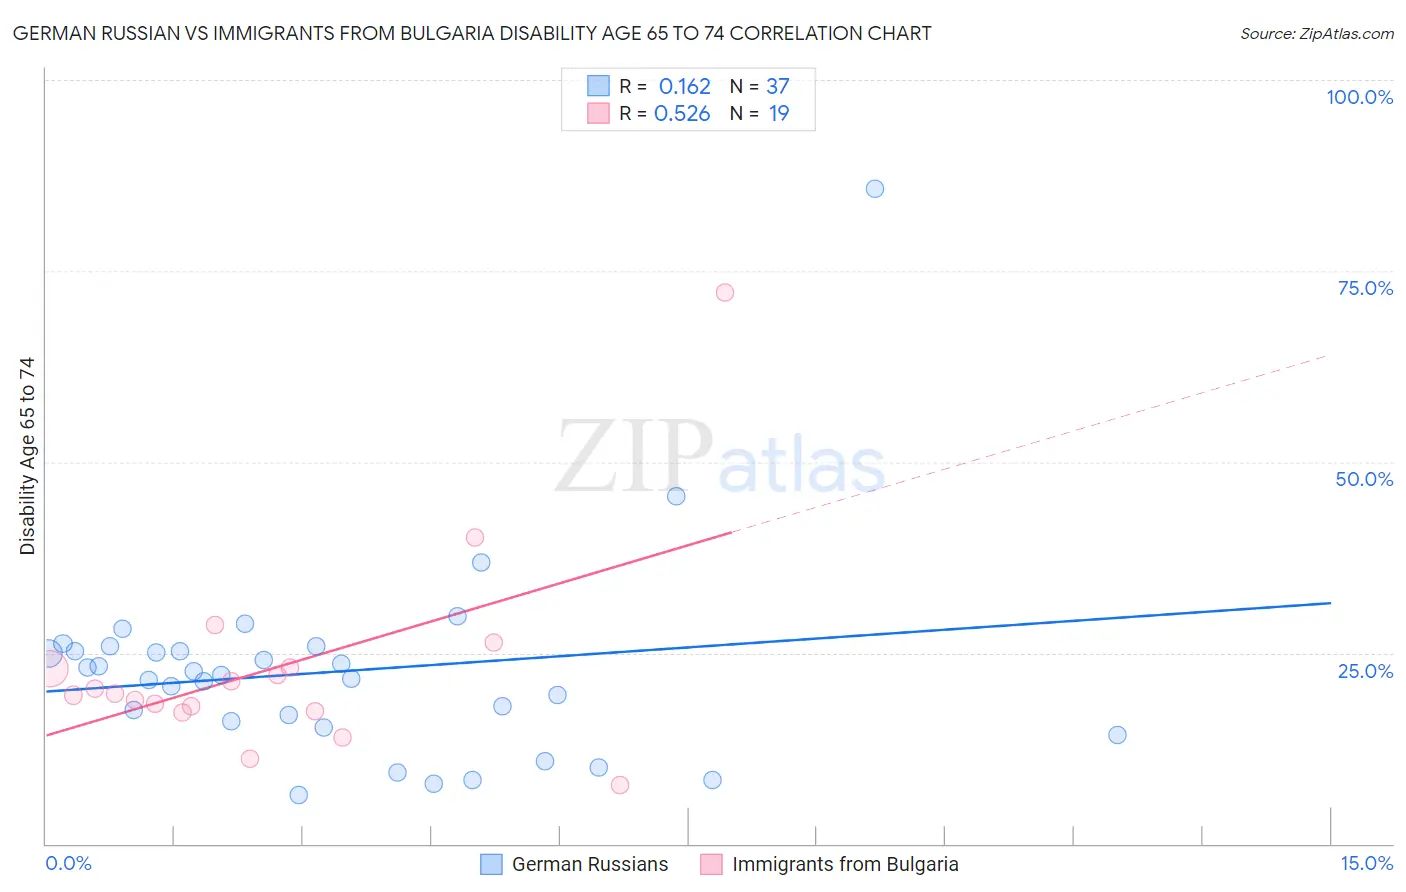 German Russian vs Immigrants from Bulgaria Disability Age 65 to 74